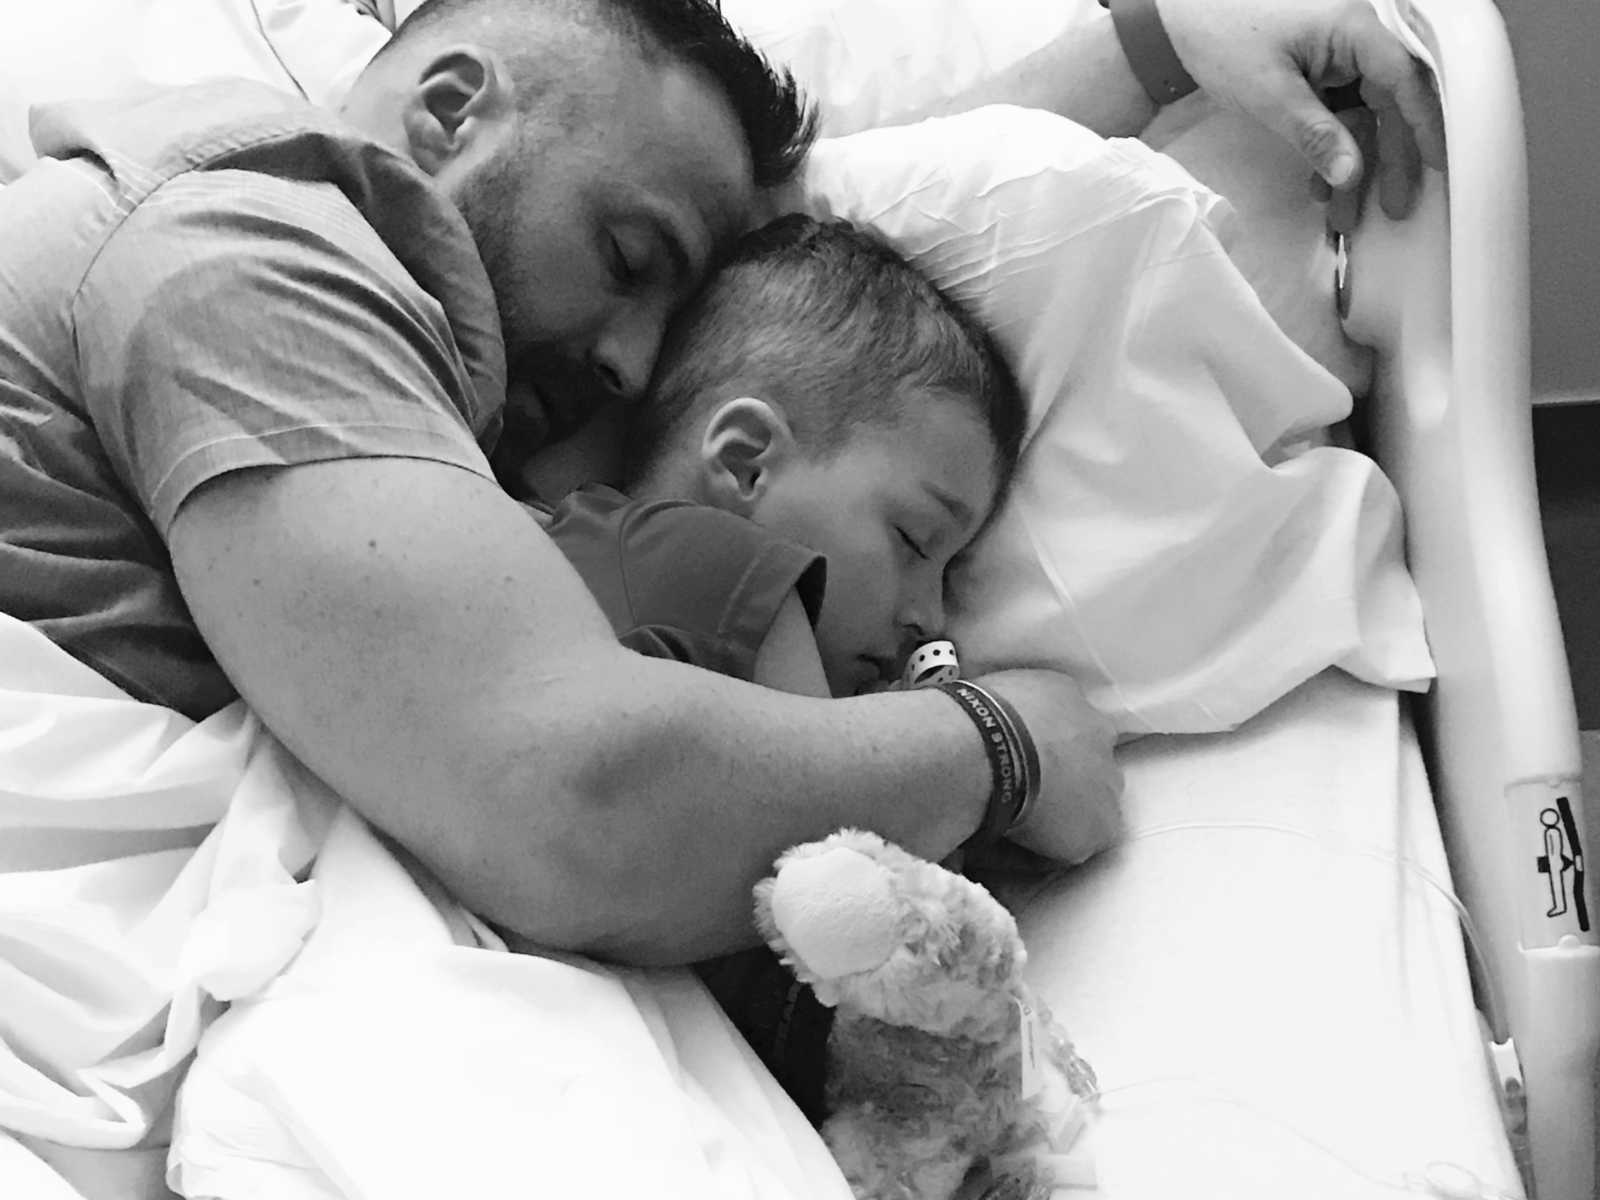 Boy with leg tumors asleep in hospital bed with dad lying next to him